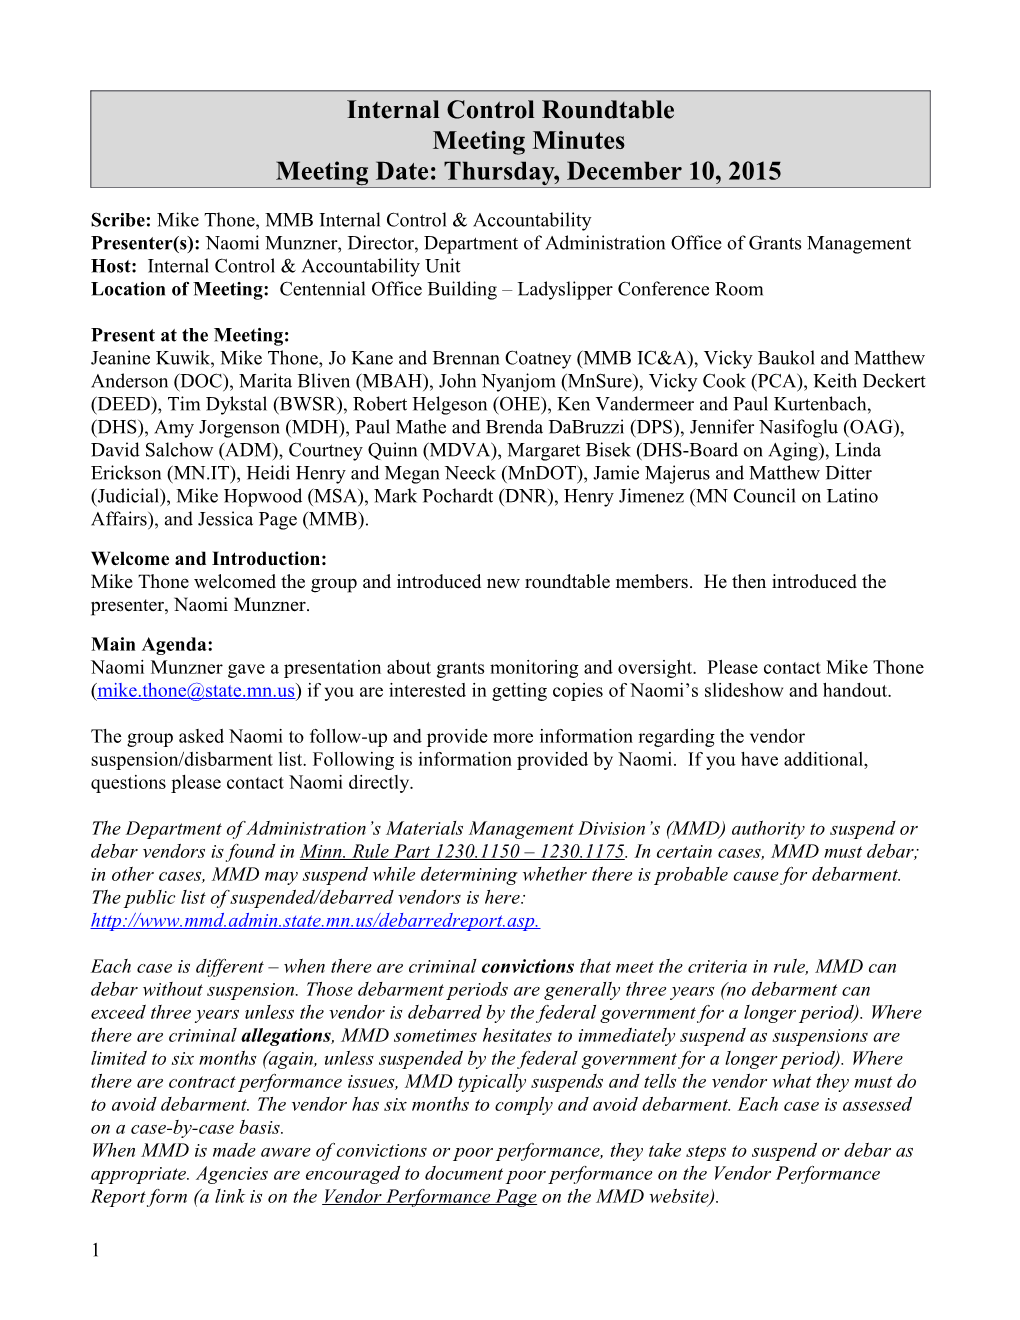 October 29, 2015 Internal Control Roundtable Meeting Minutes